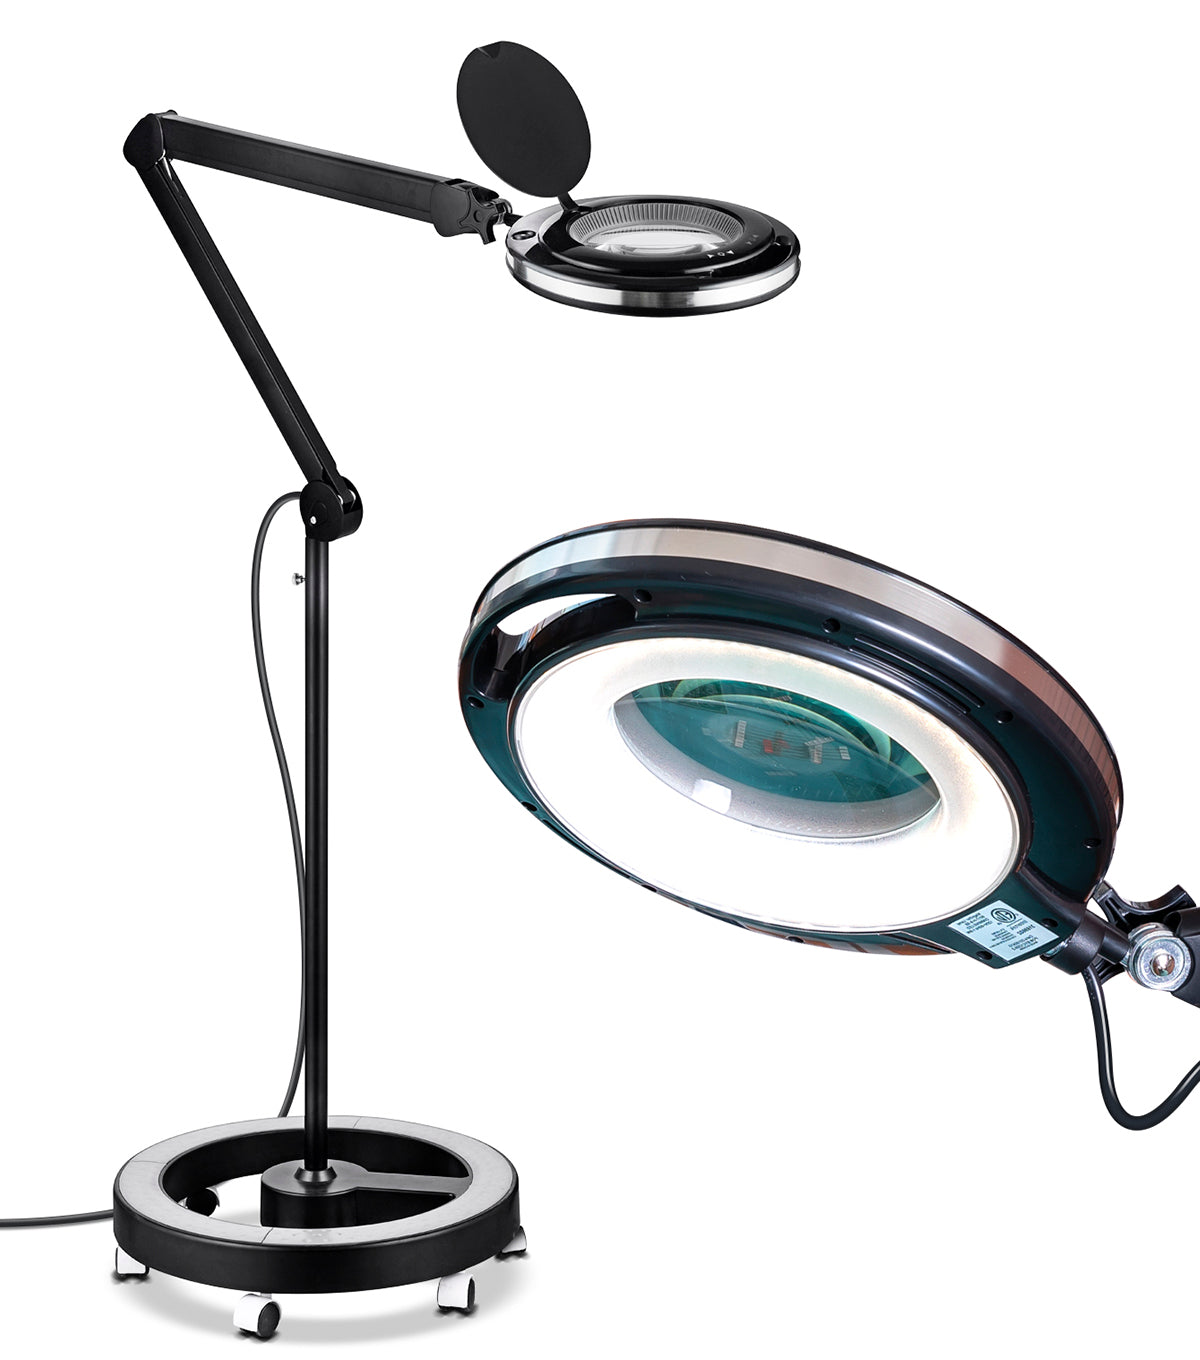 10x Magnifying Glass Stand with 13 Flexible Gooseneck Arm and